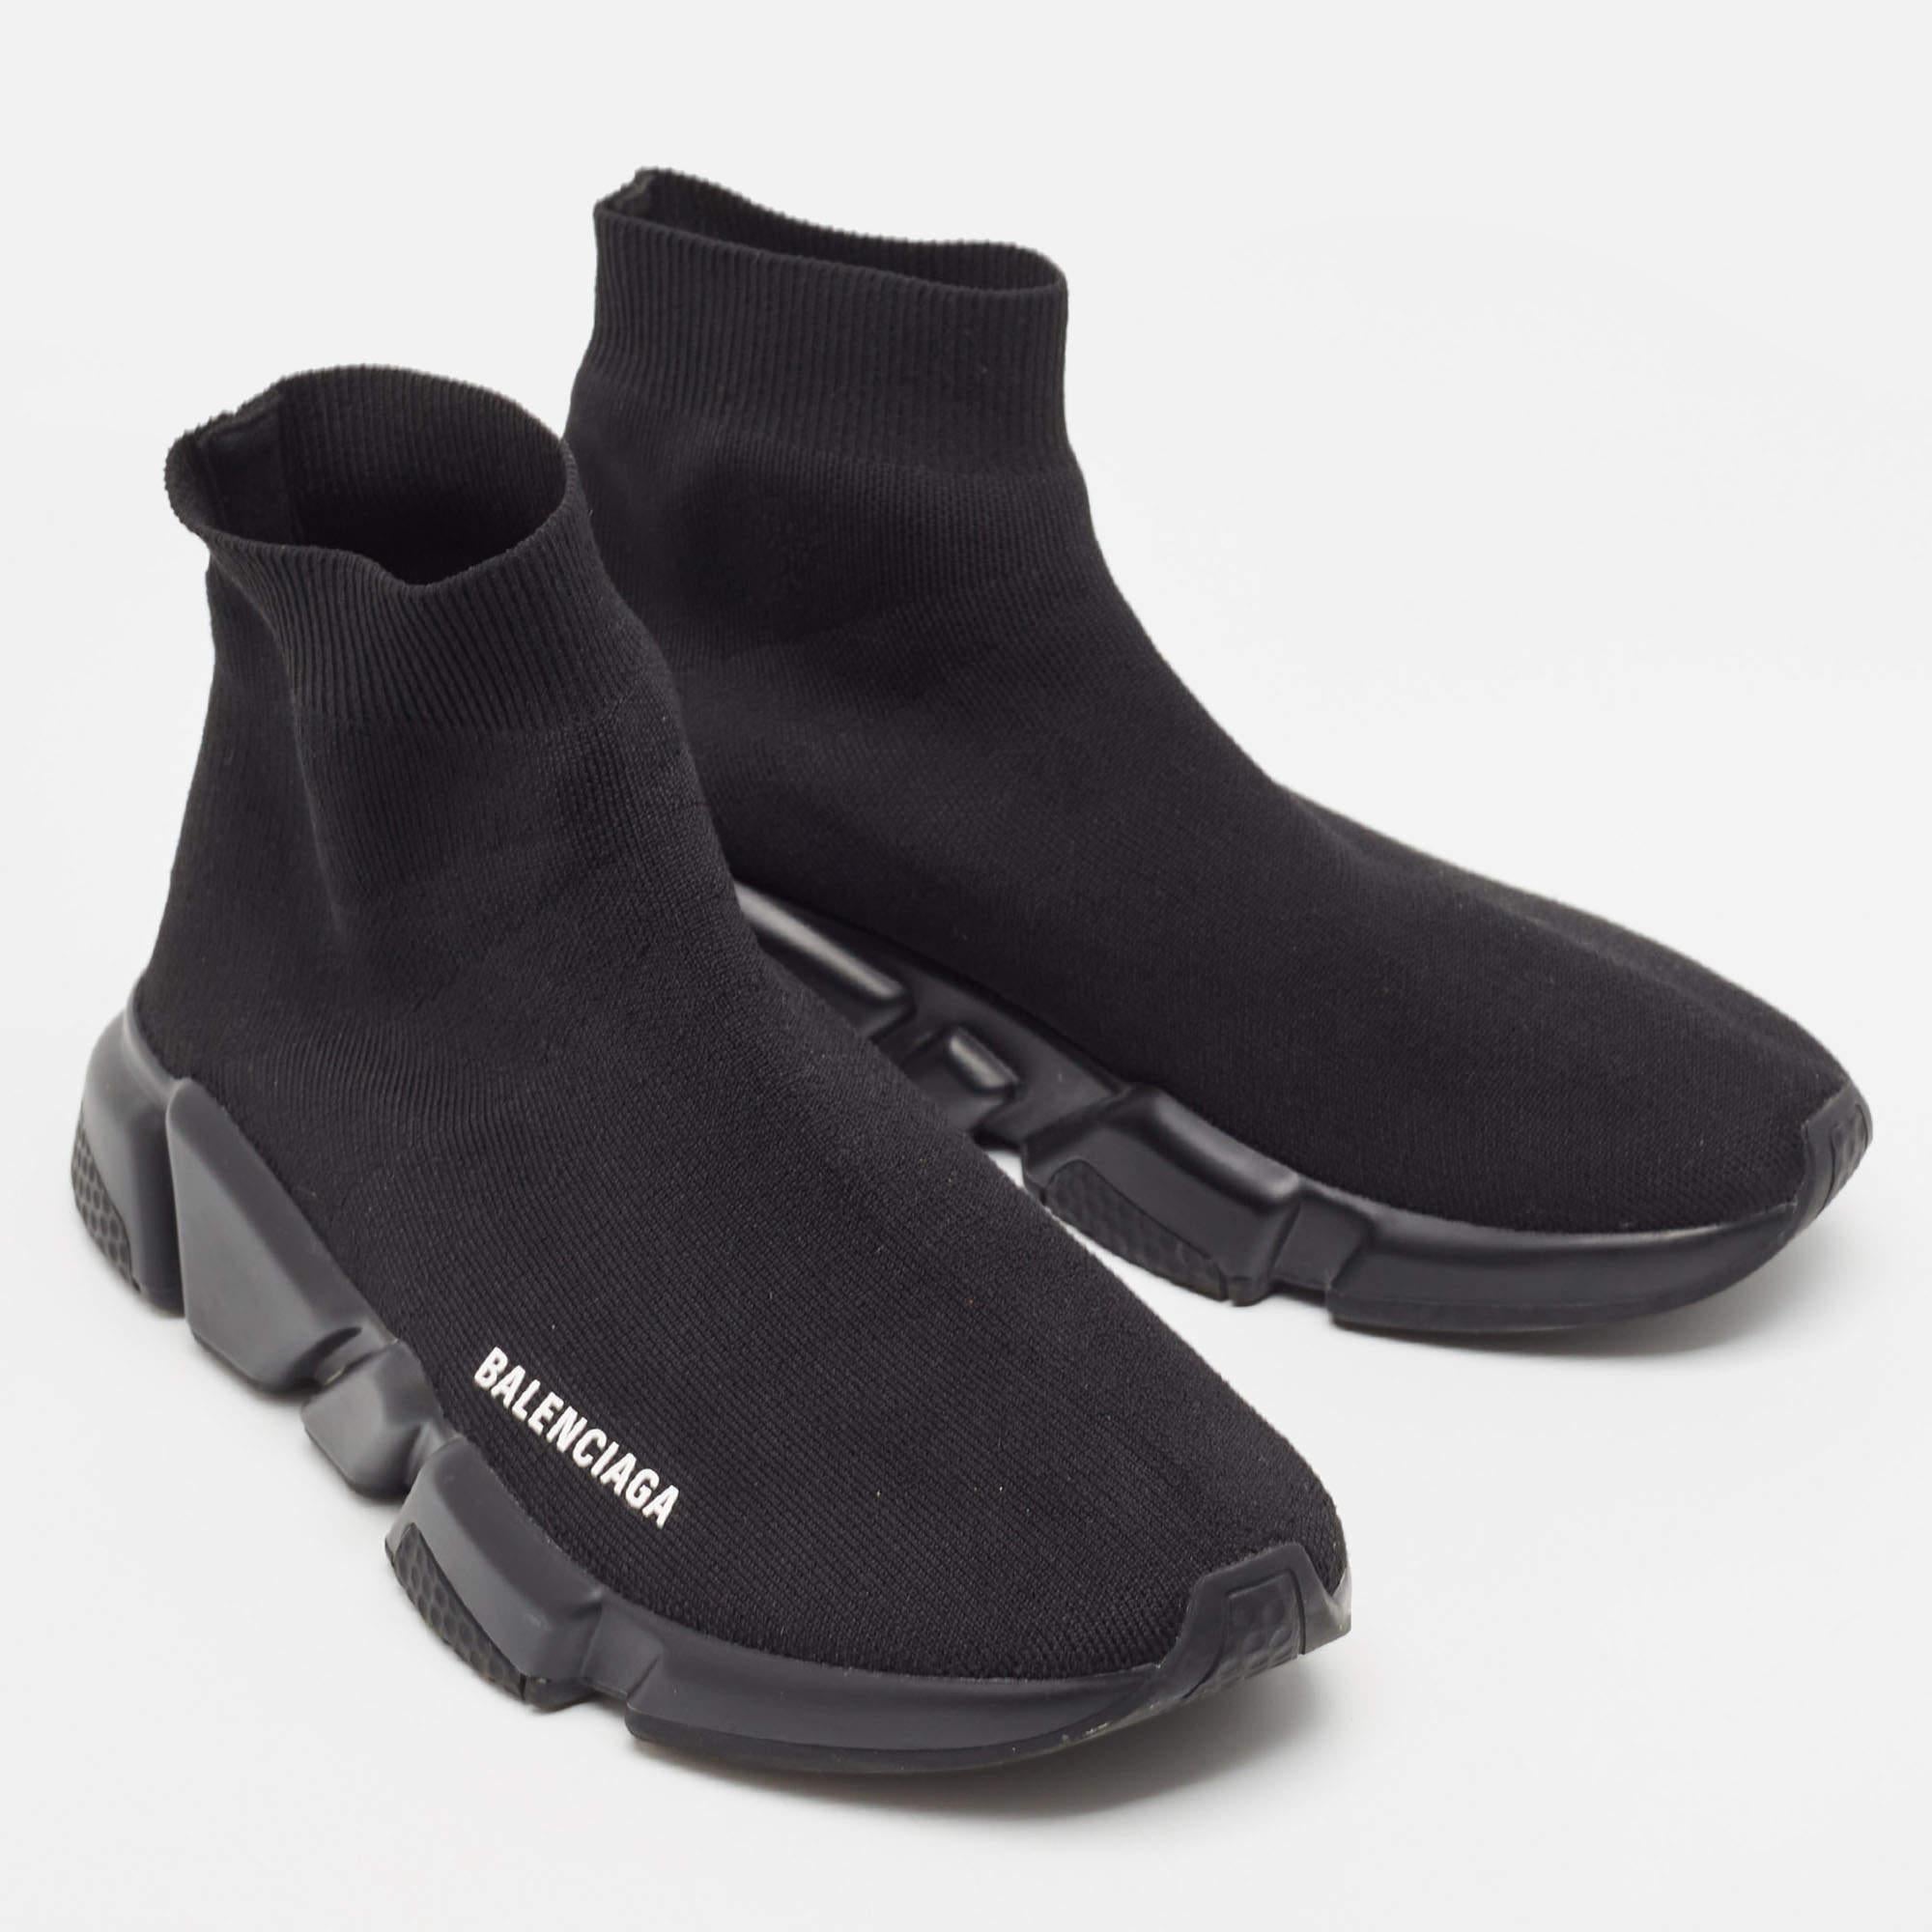 Balenciaga Black Knit Fabric Speed Trainer Sneakers Size 41 For Sale 2